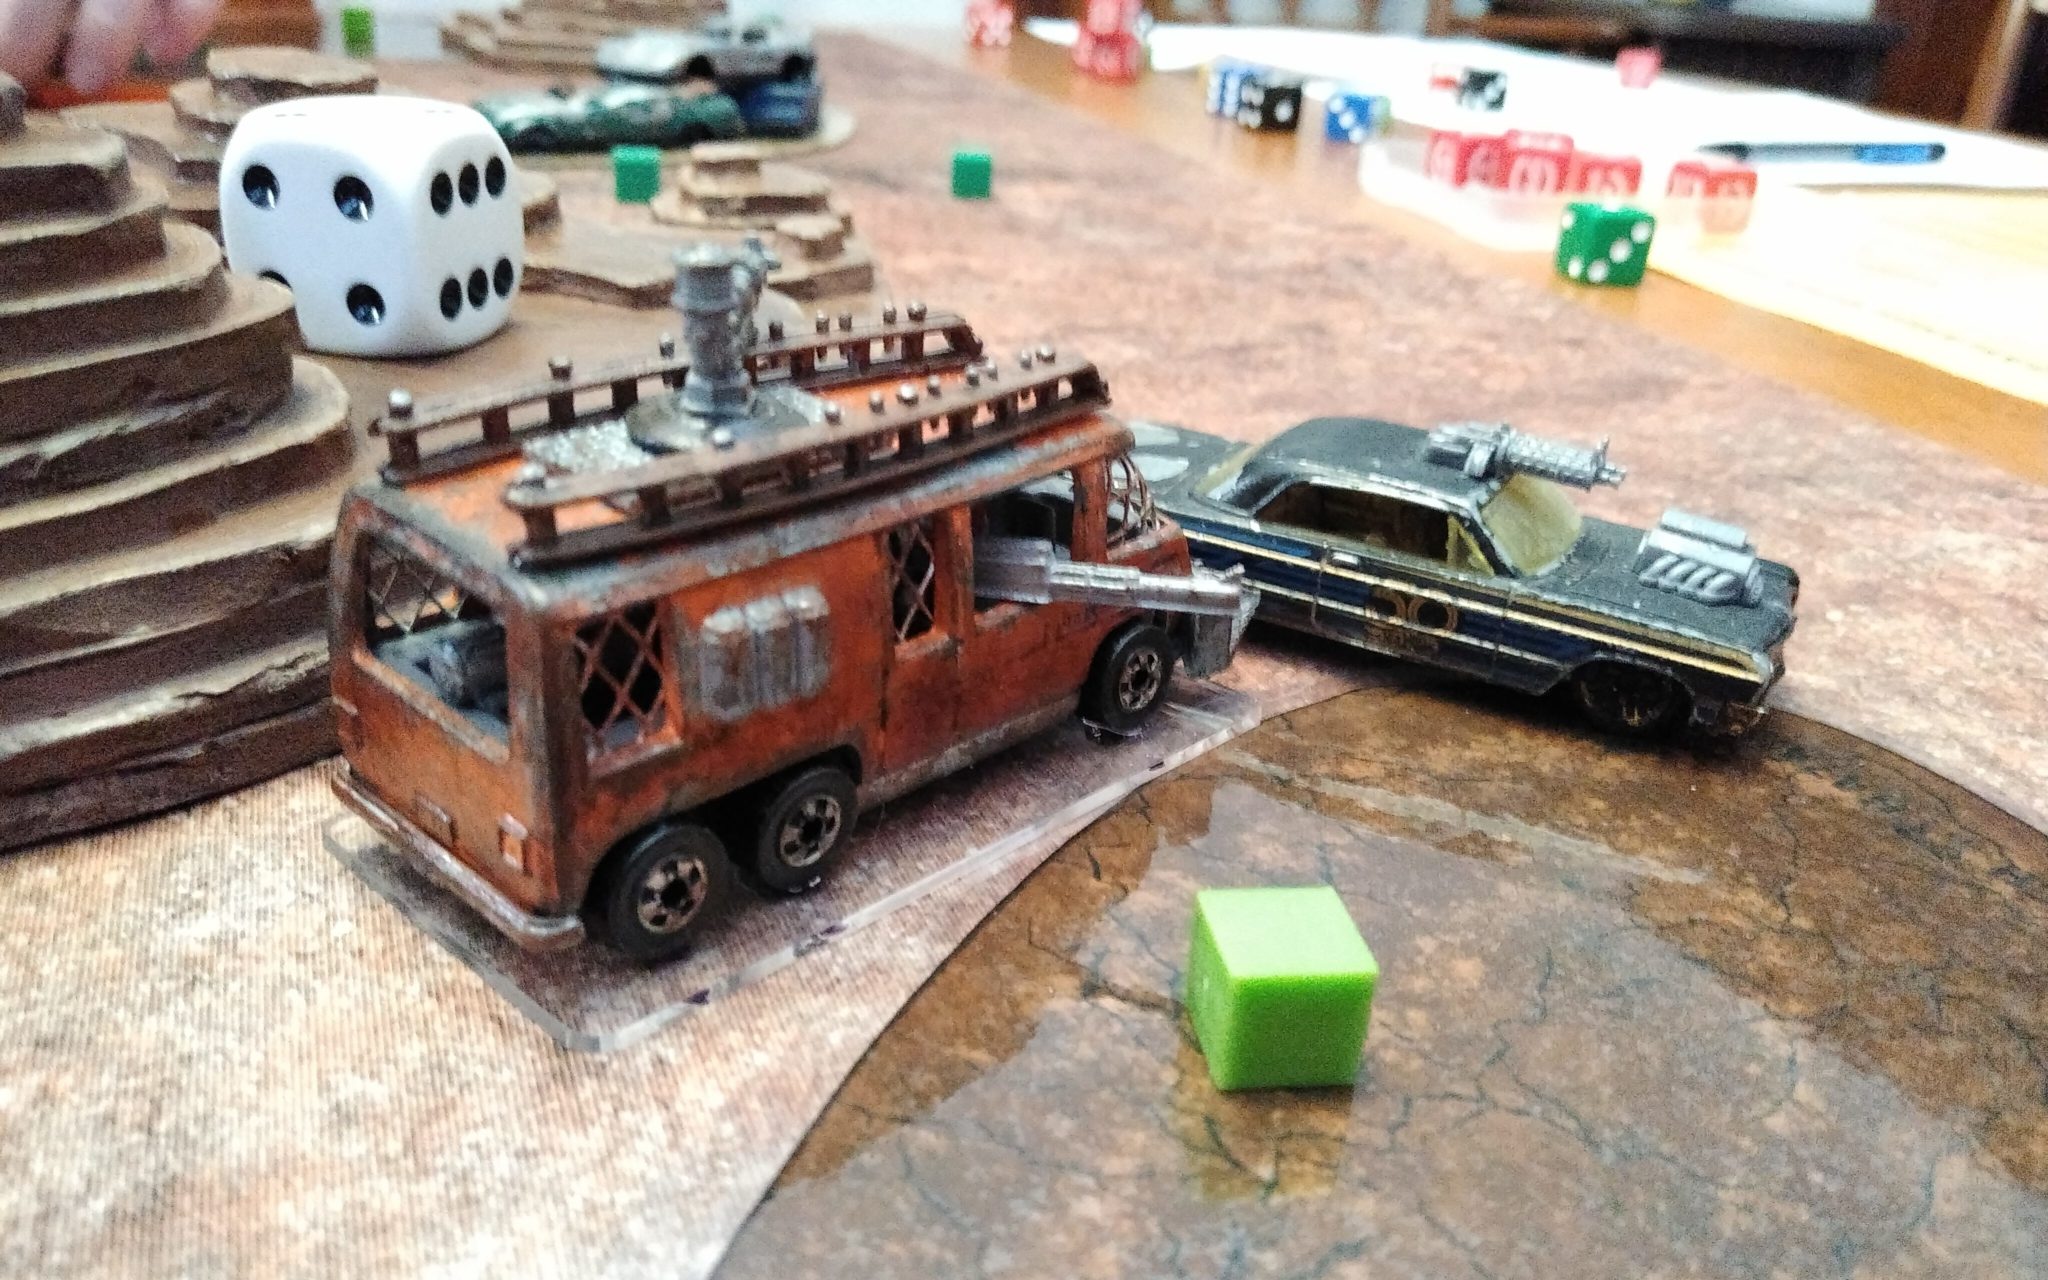 A Matchbox sized VW Bus crashing into another armored car